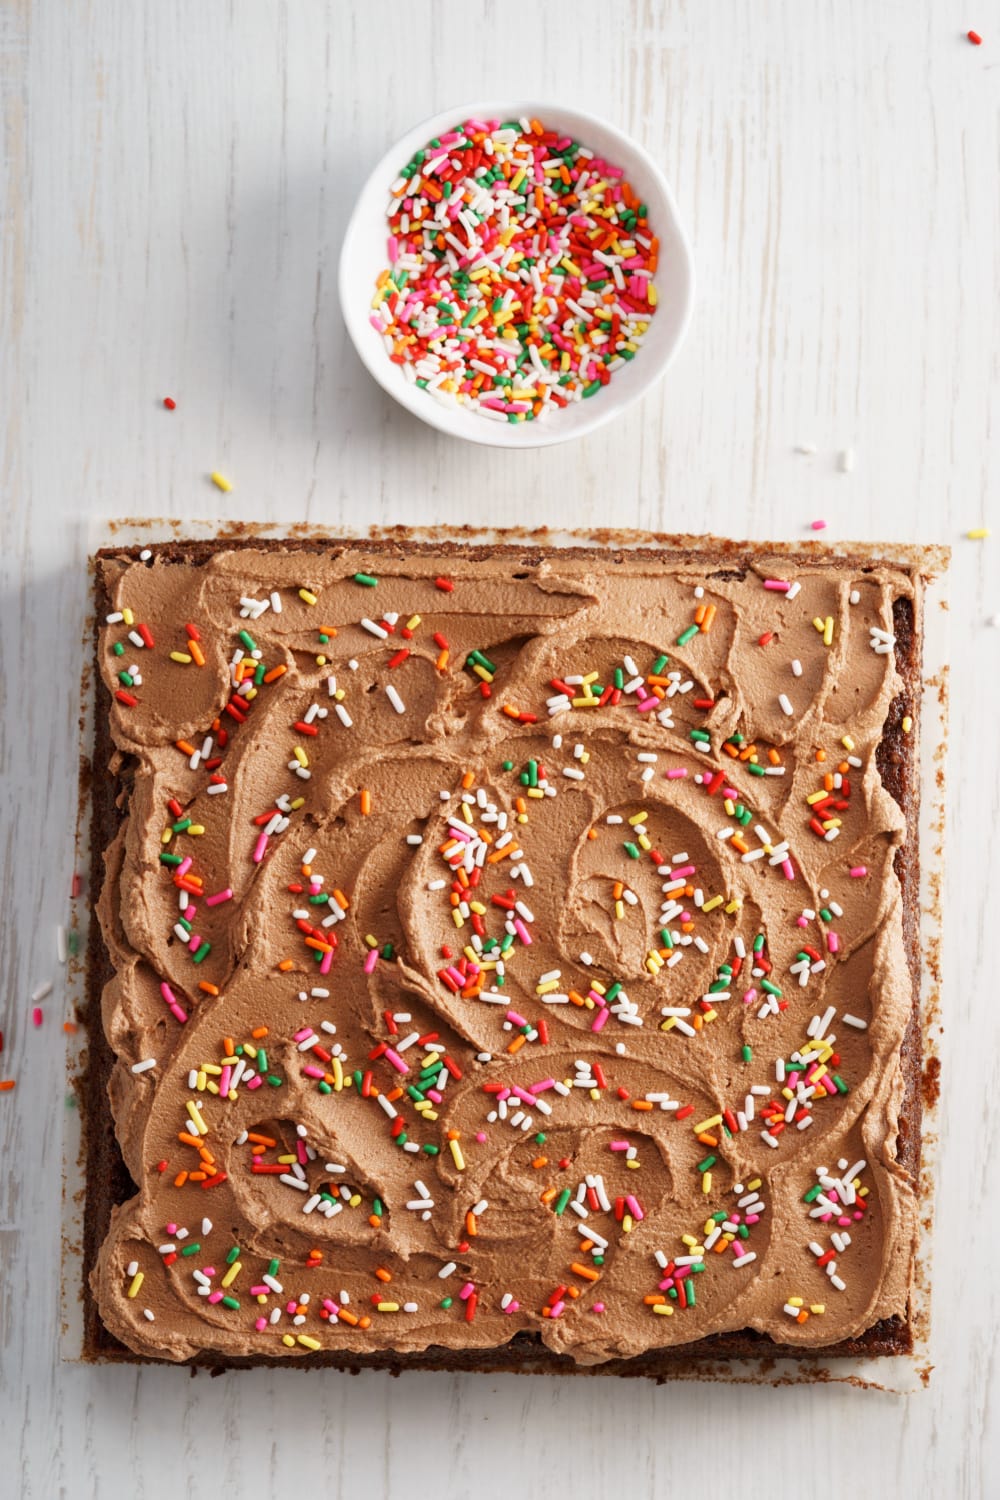 Chocolate Depression Cake (Wacky Cake) with spread of buttercream frosting on top and sprinkles. 